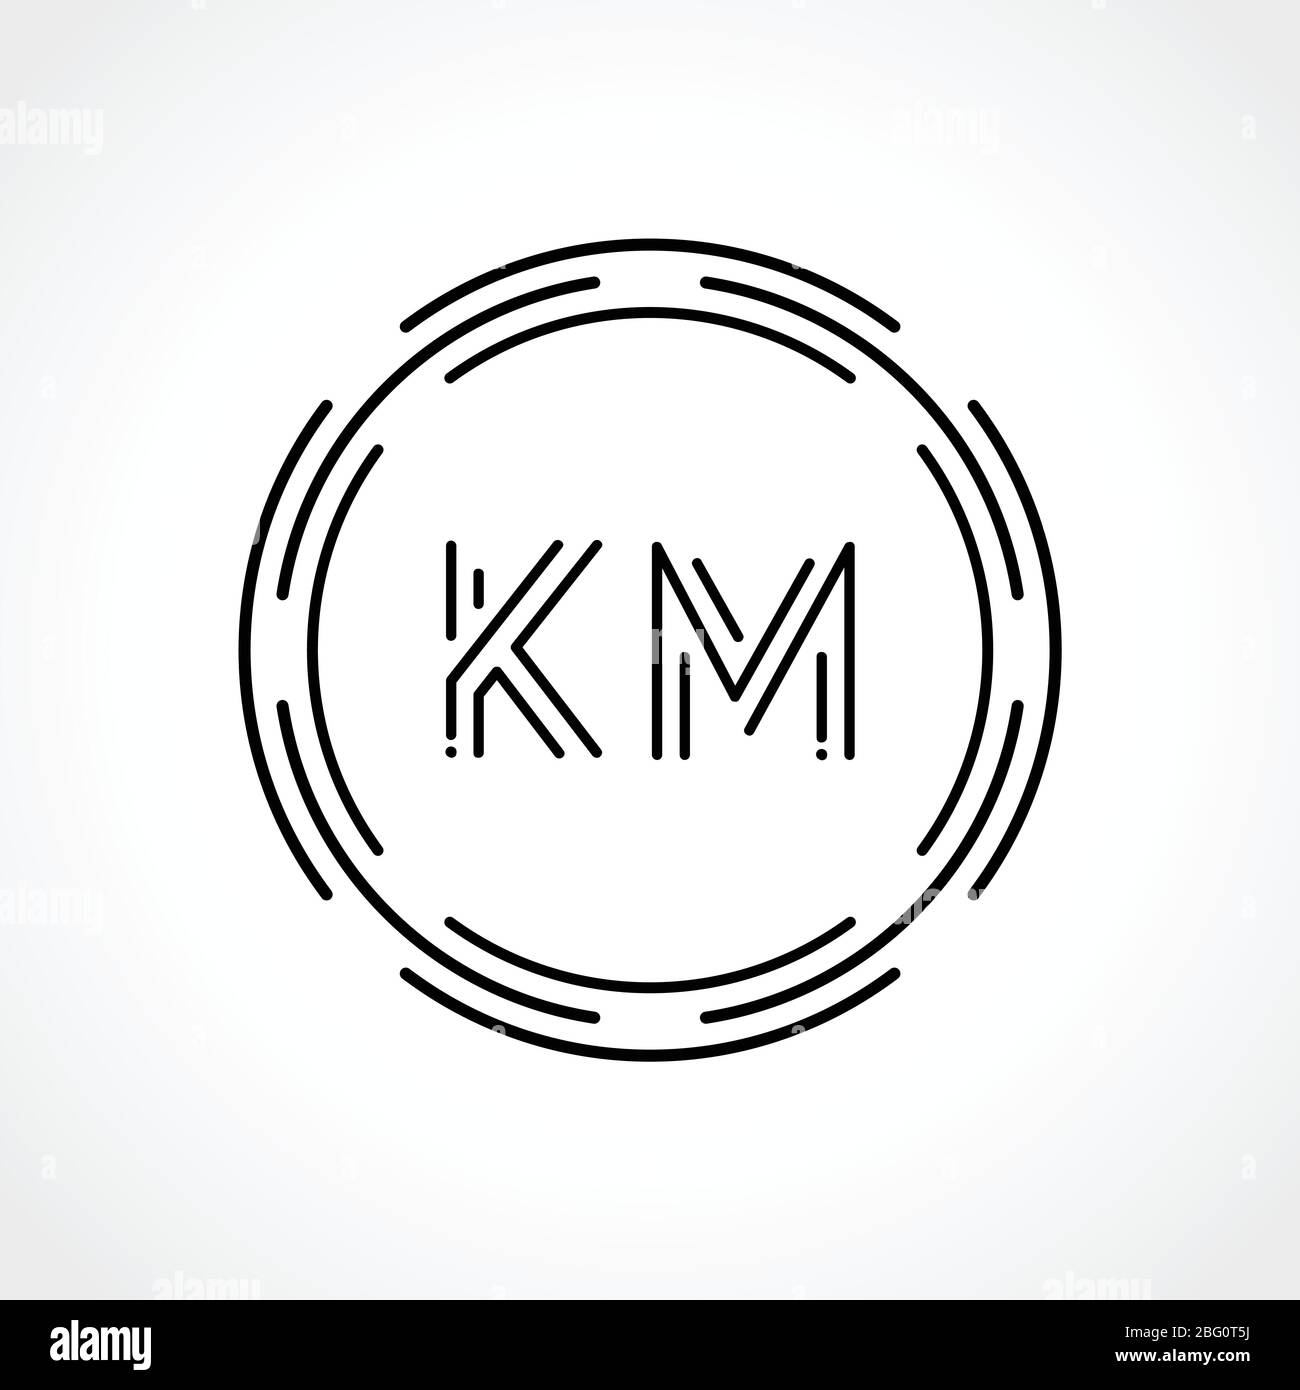 Initial Letter KM Logo Design vector Template. Digital Abstract KM ...